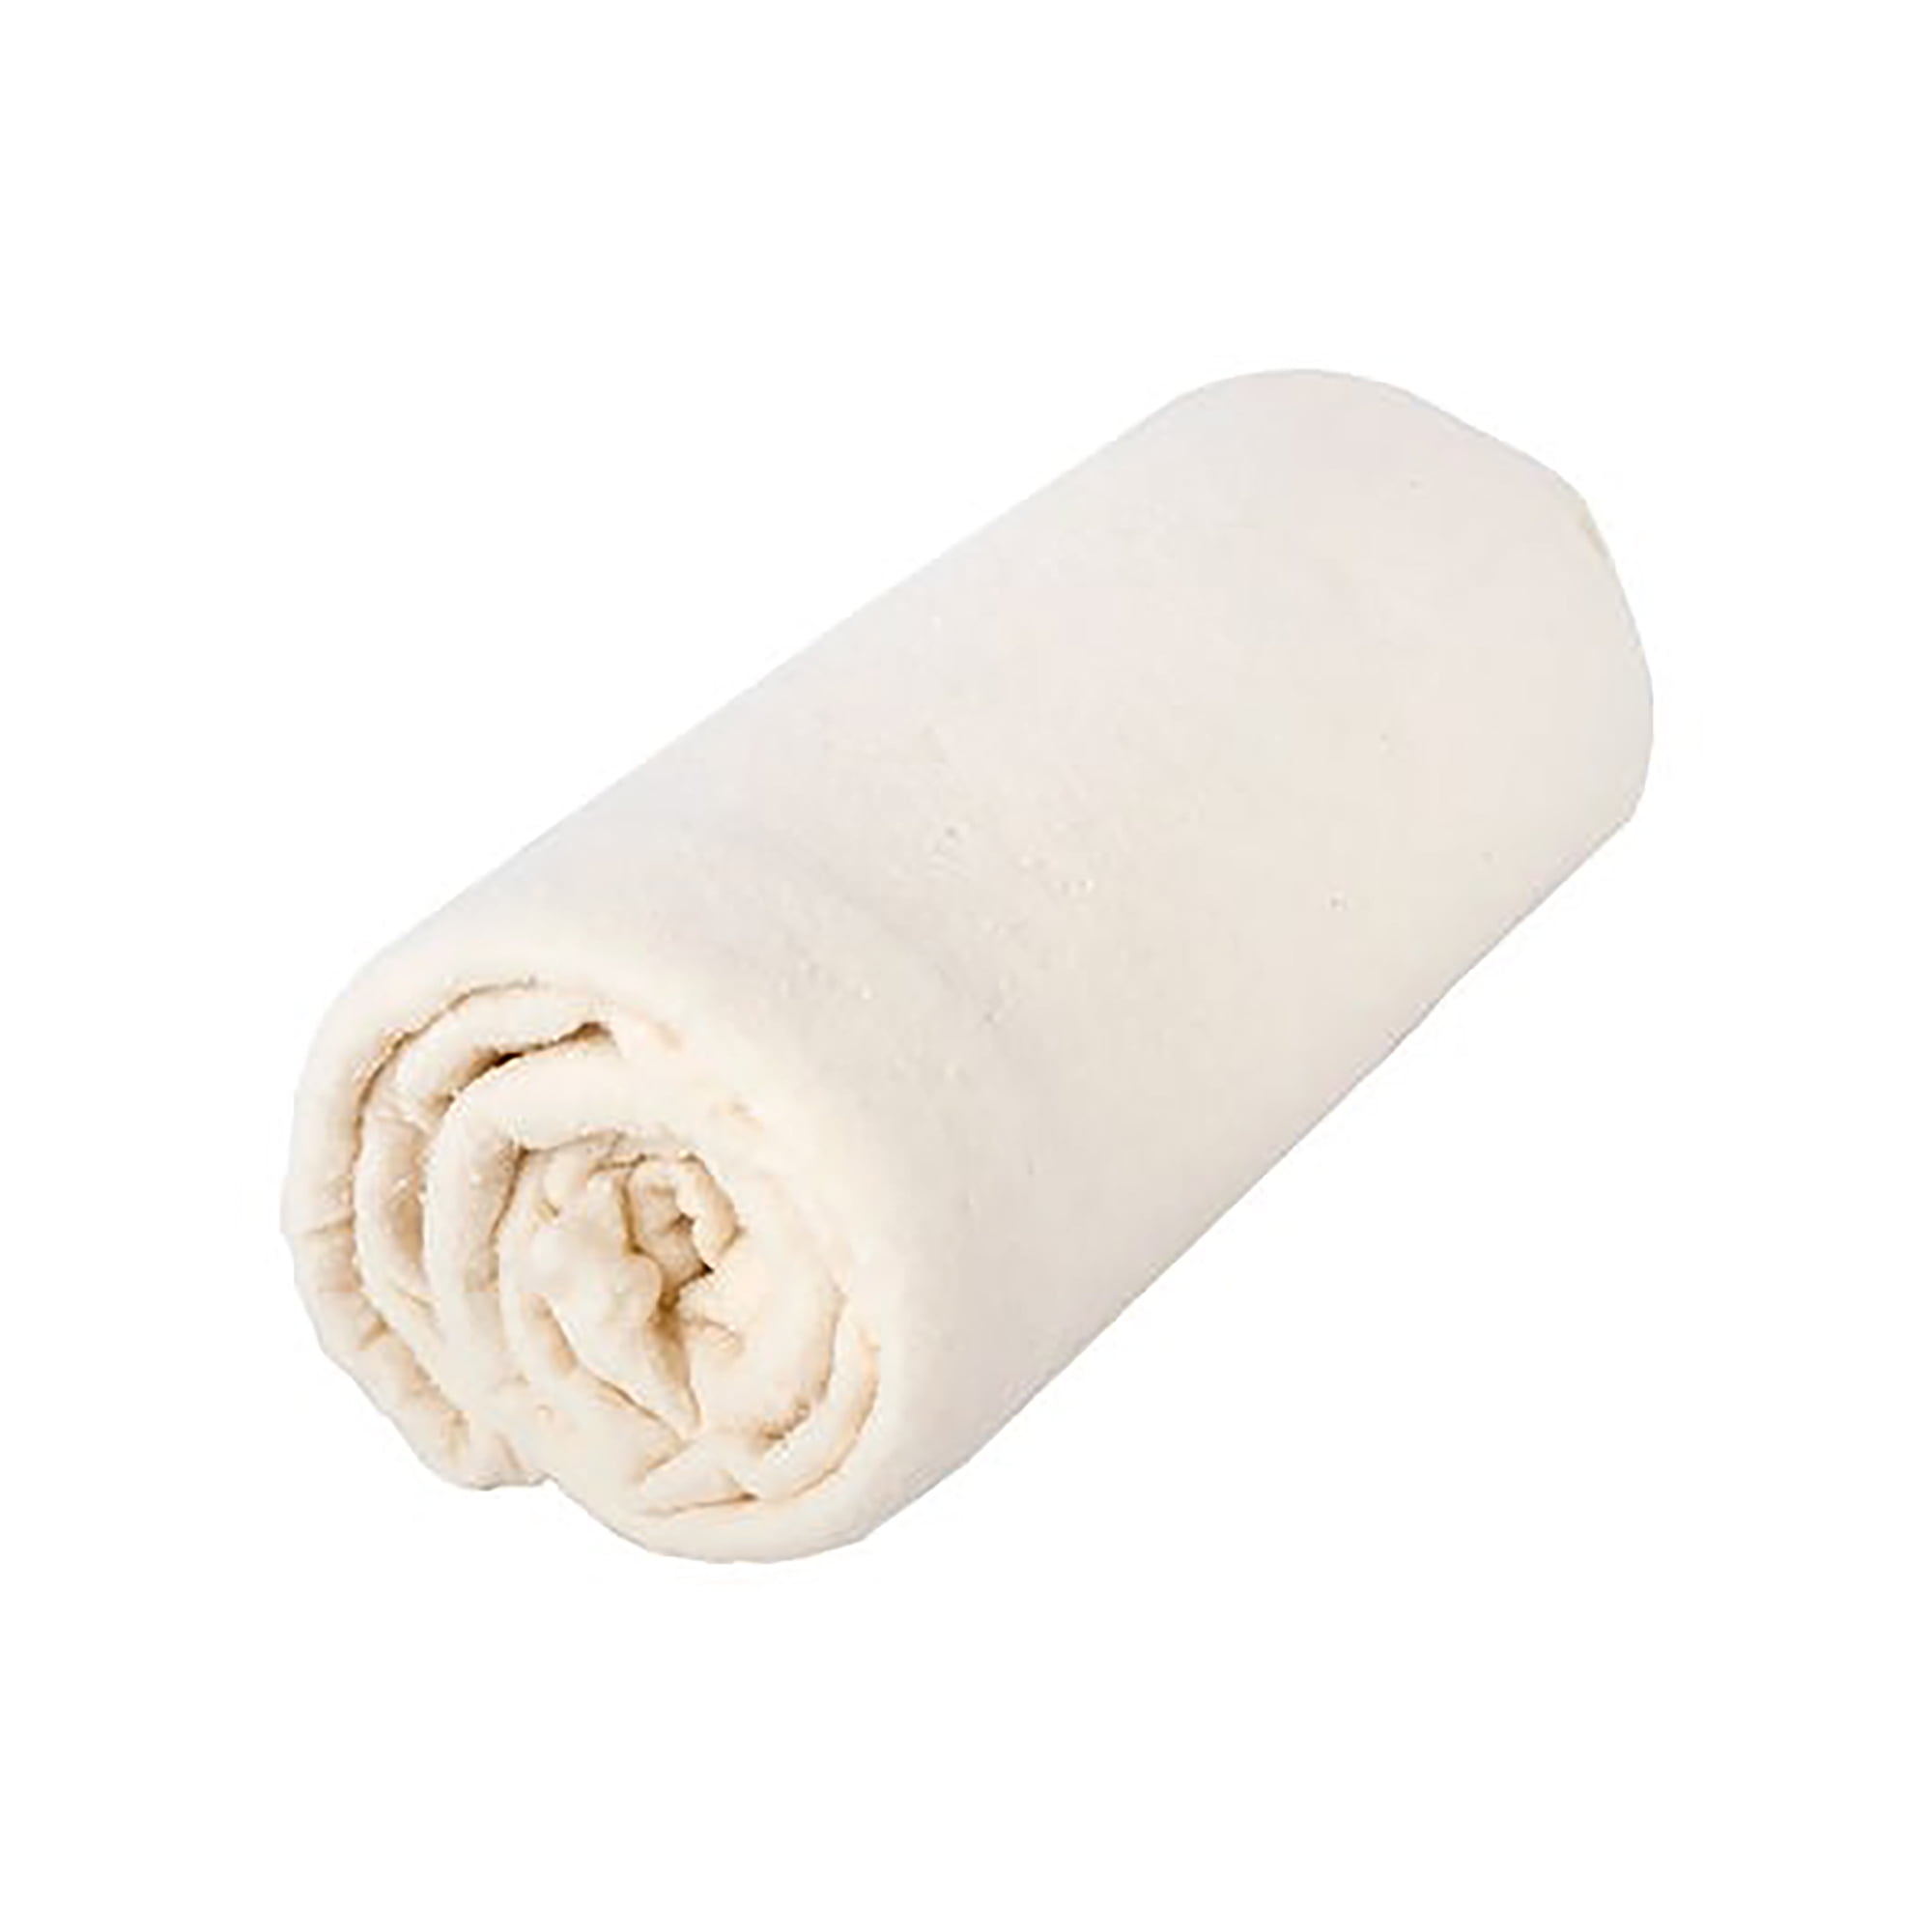 LENAILIN Quilt Batting Crib Size 45 x 60 Medium Weight Batting Roll  ，Natural Cotton Batting for Quilting,for Stuffing Blankets and Quilting  Supplies